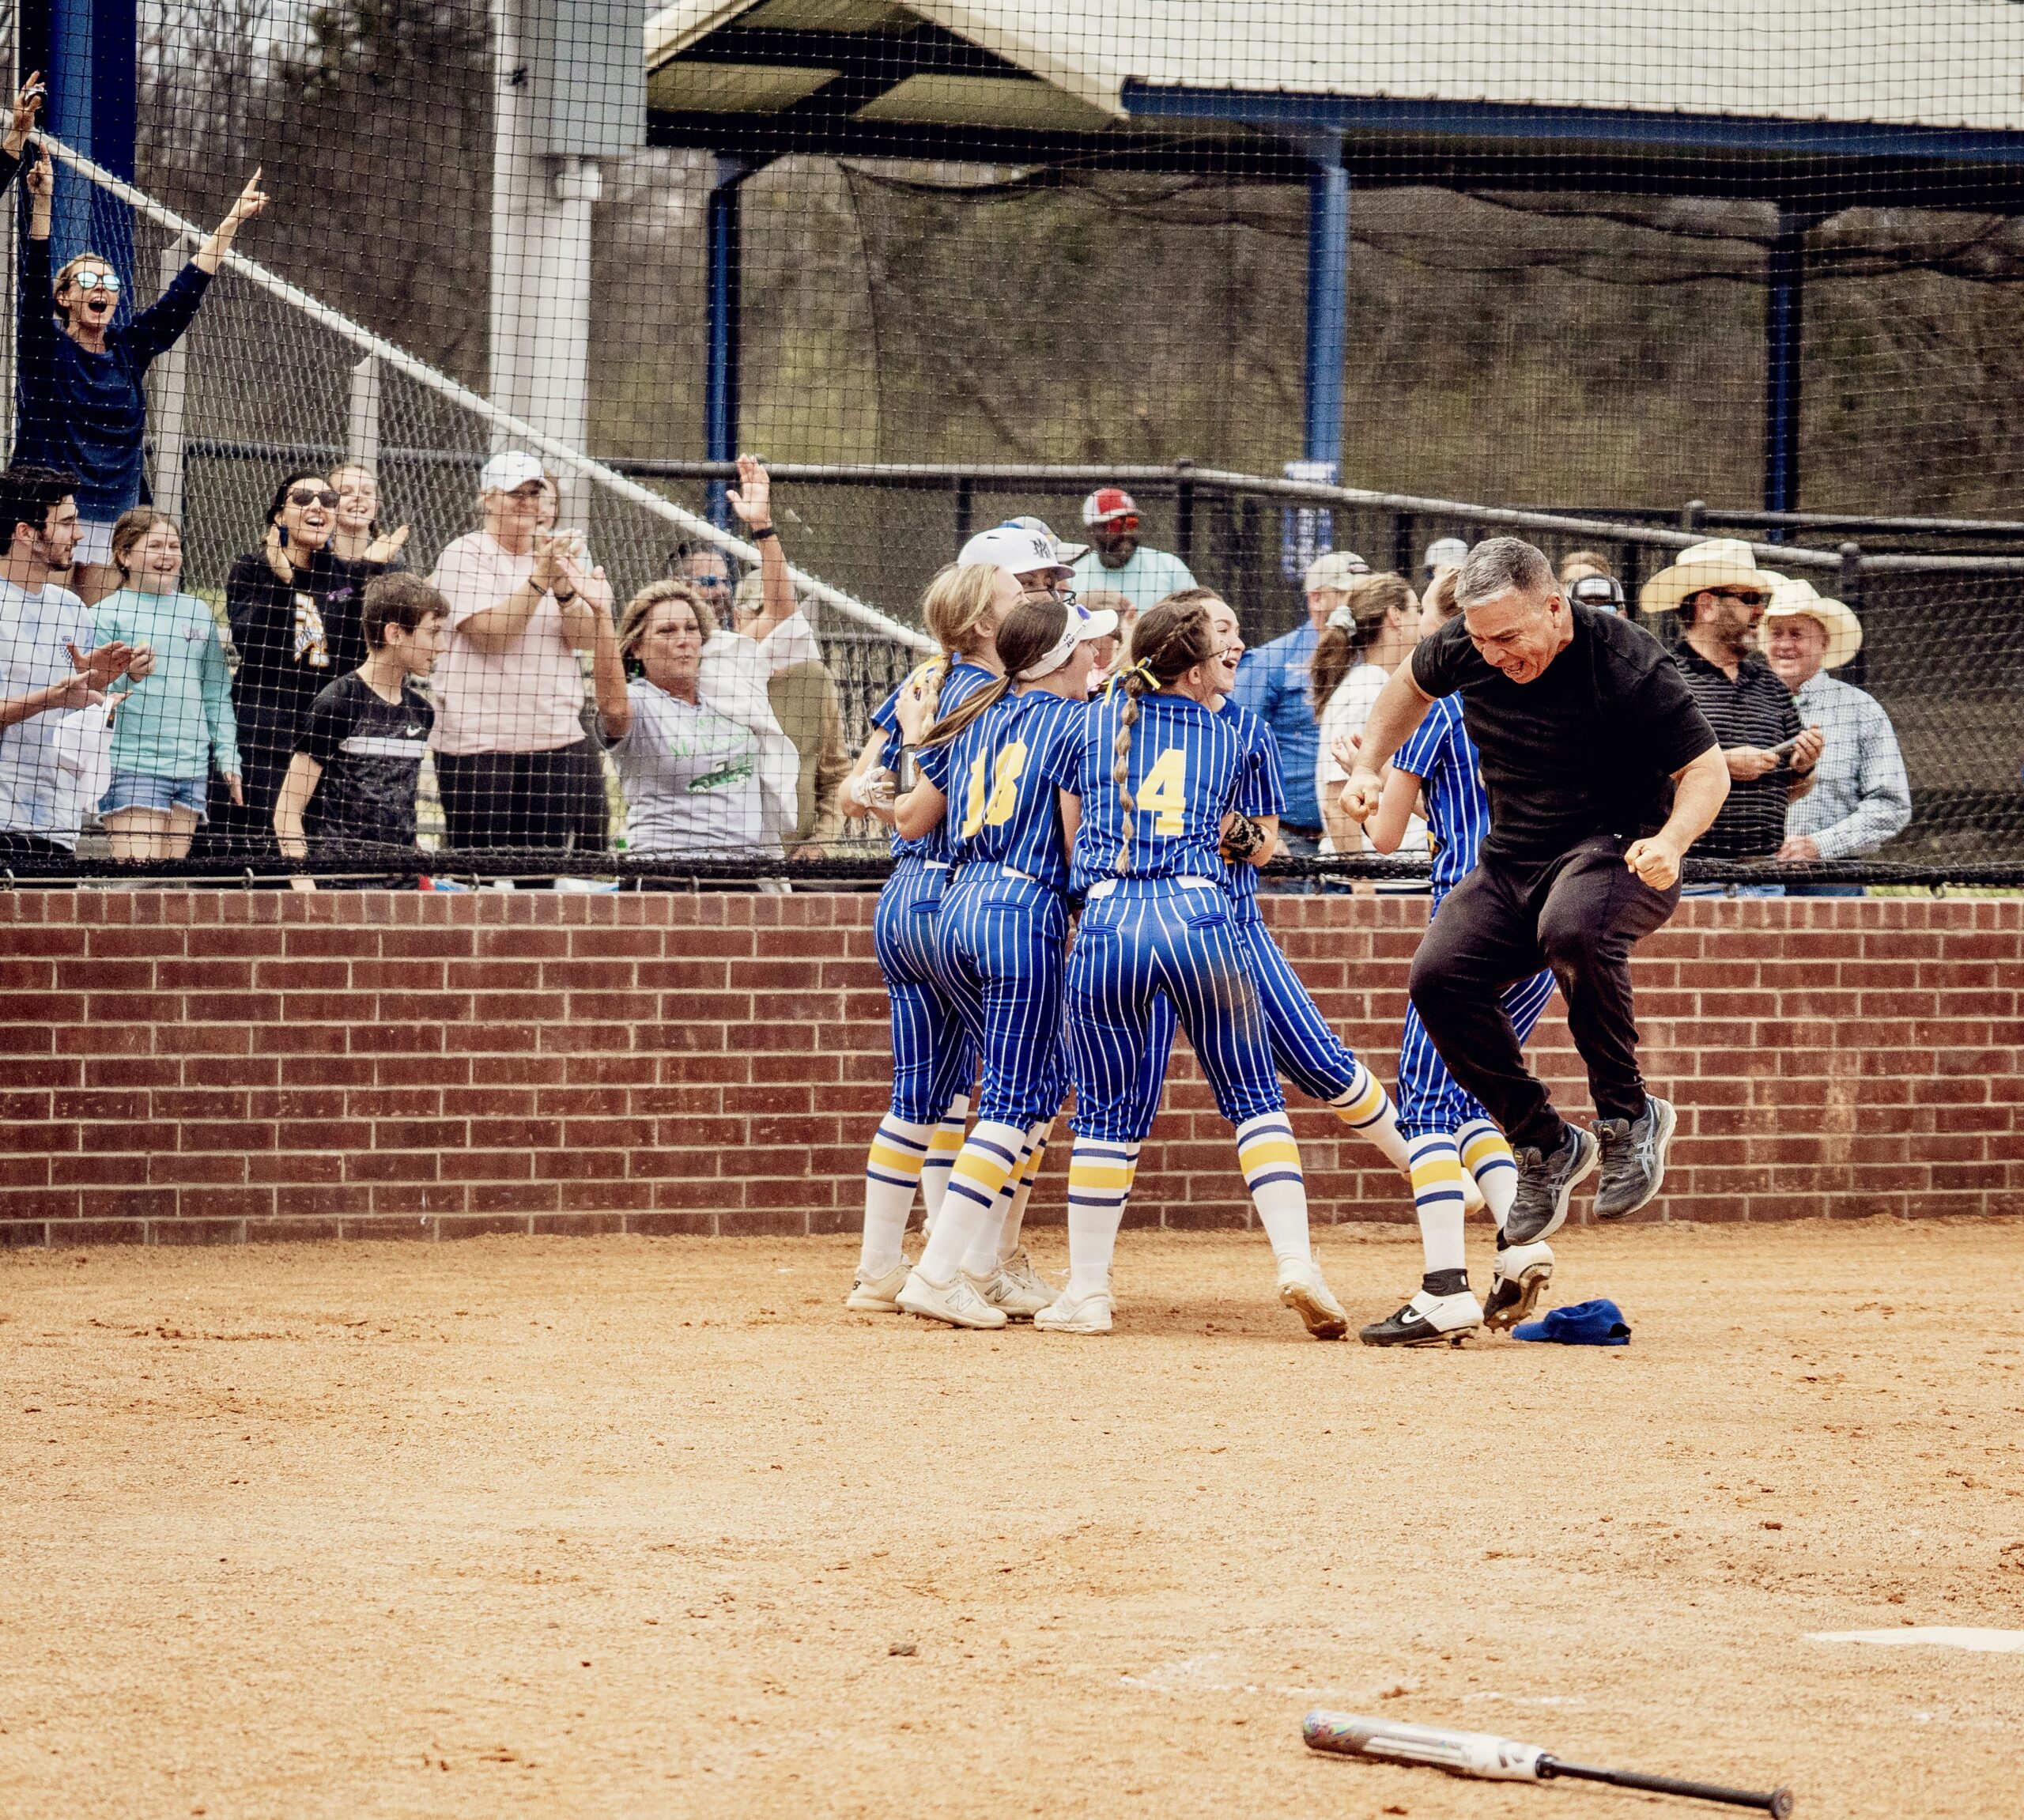 Lady Cats win in walk-off fashion